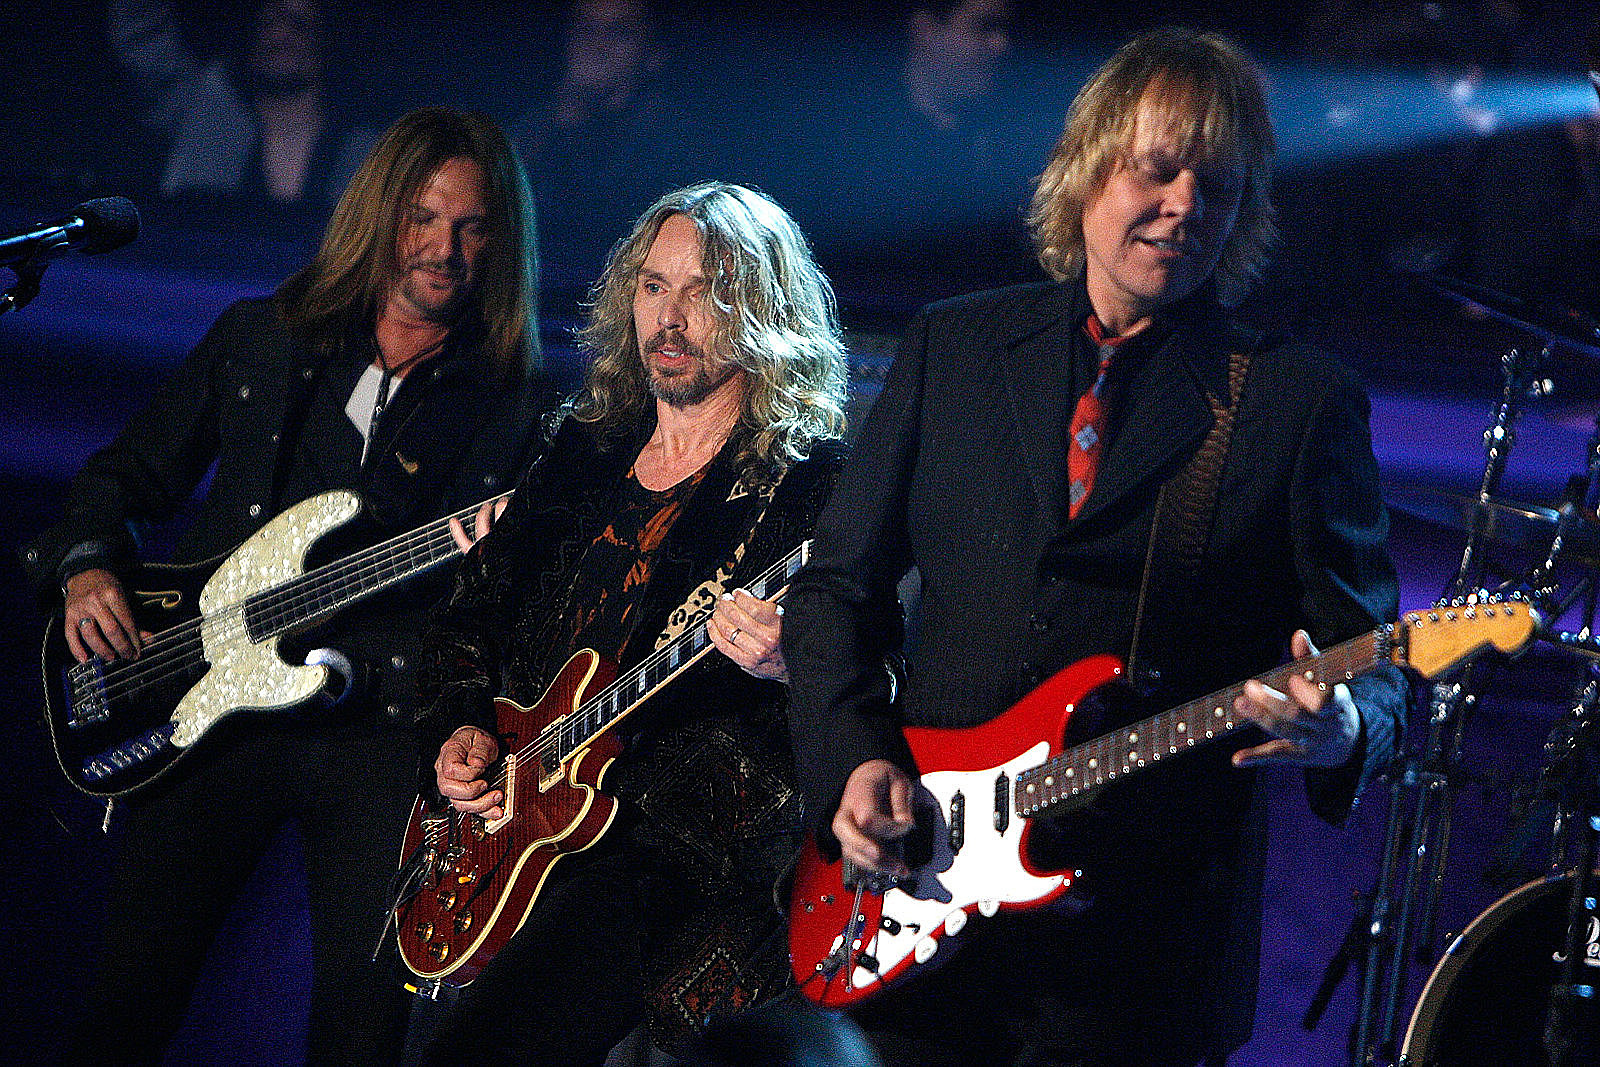 Styx Tour Dates 2022 Where to Buy Tickets